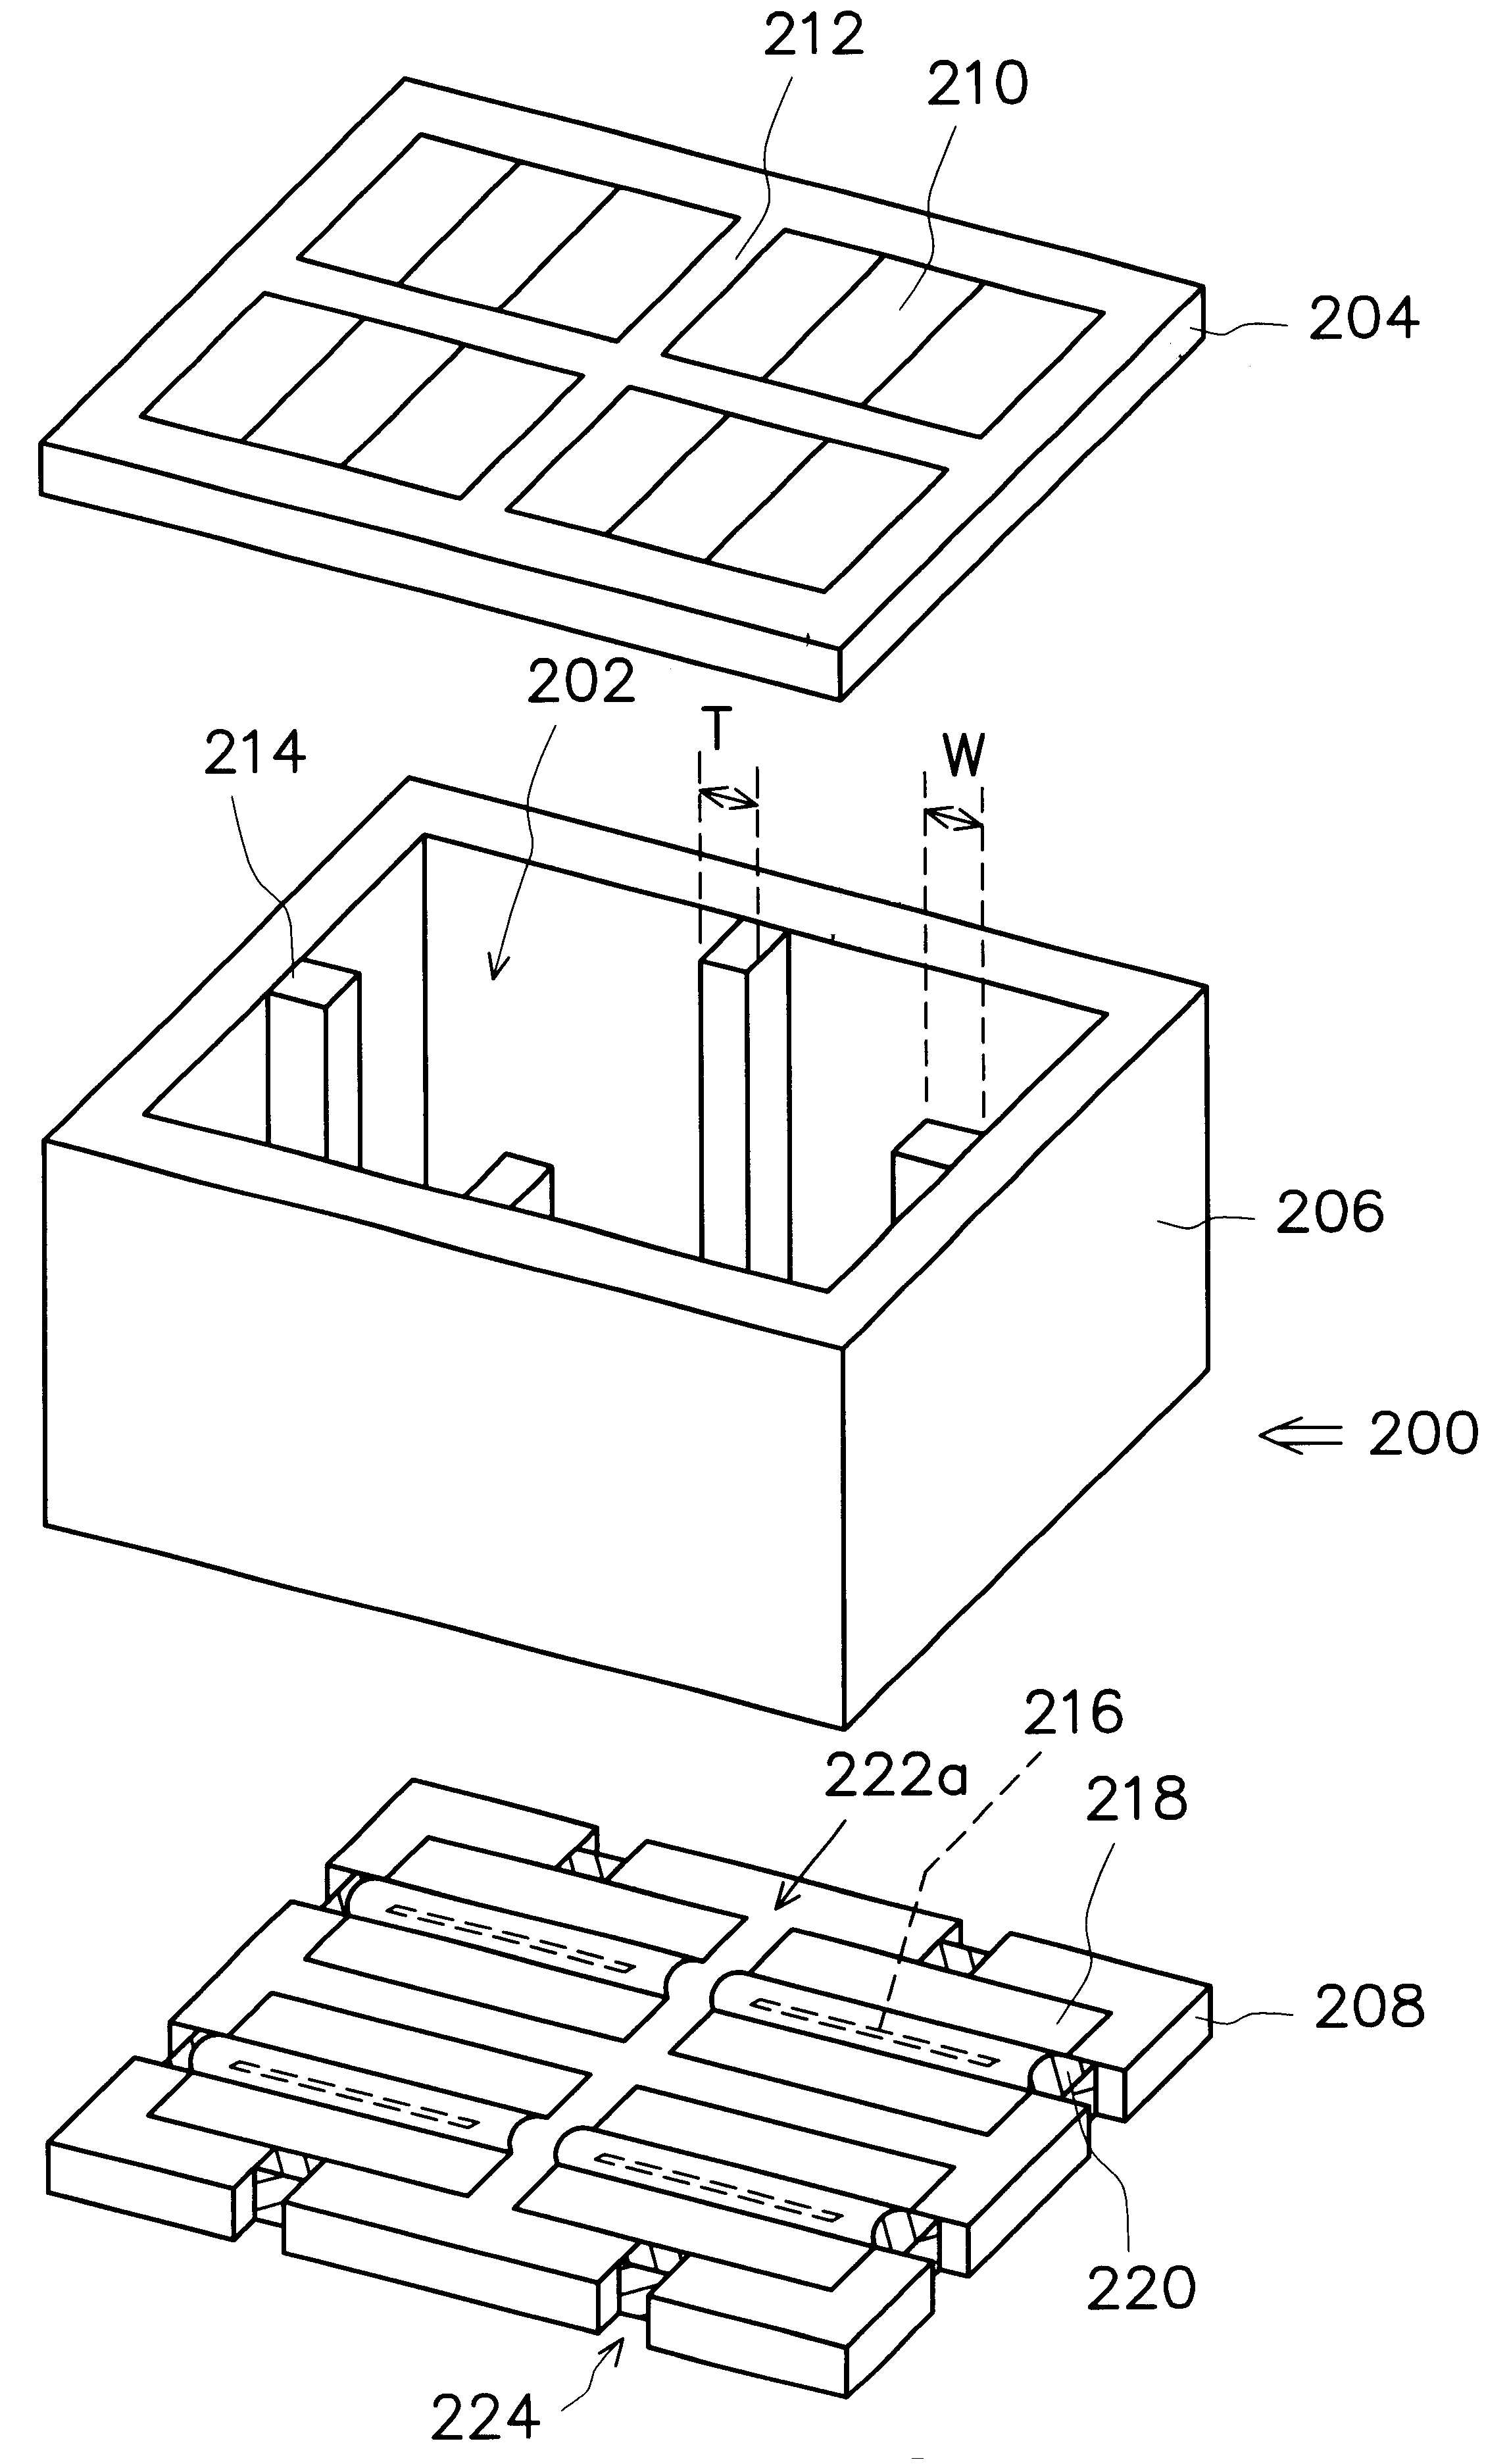 Structure of a vacuum display device